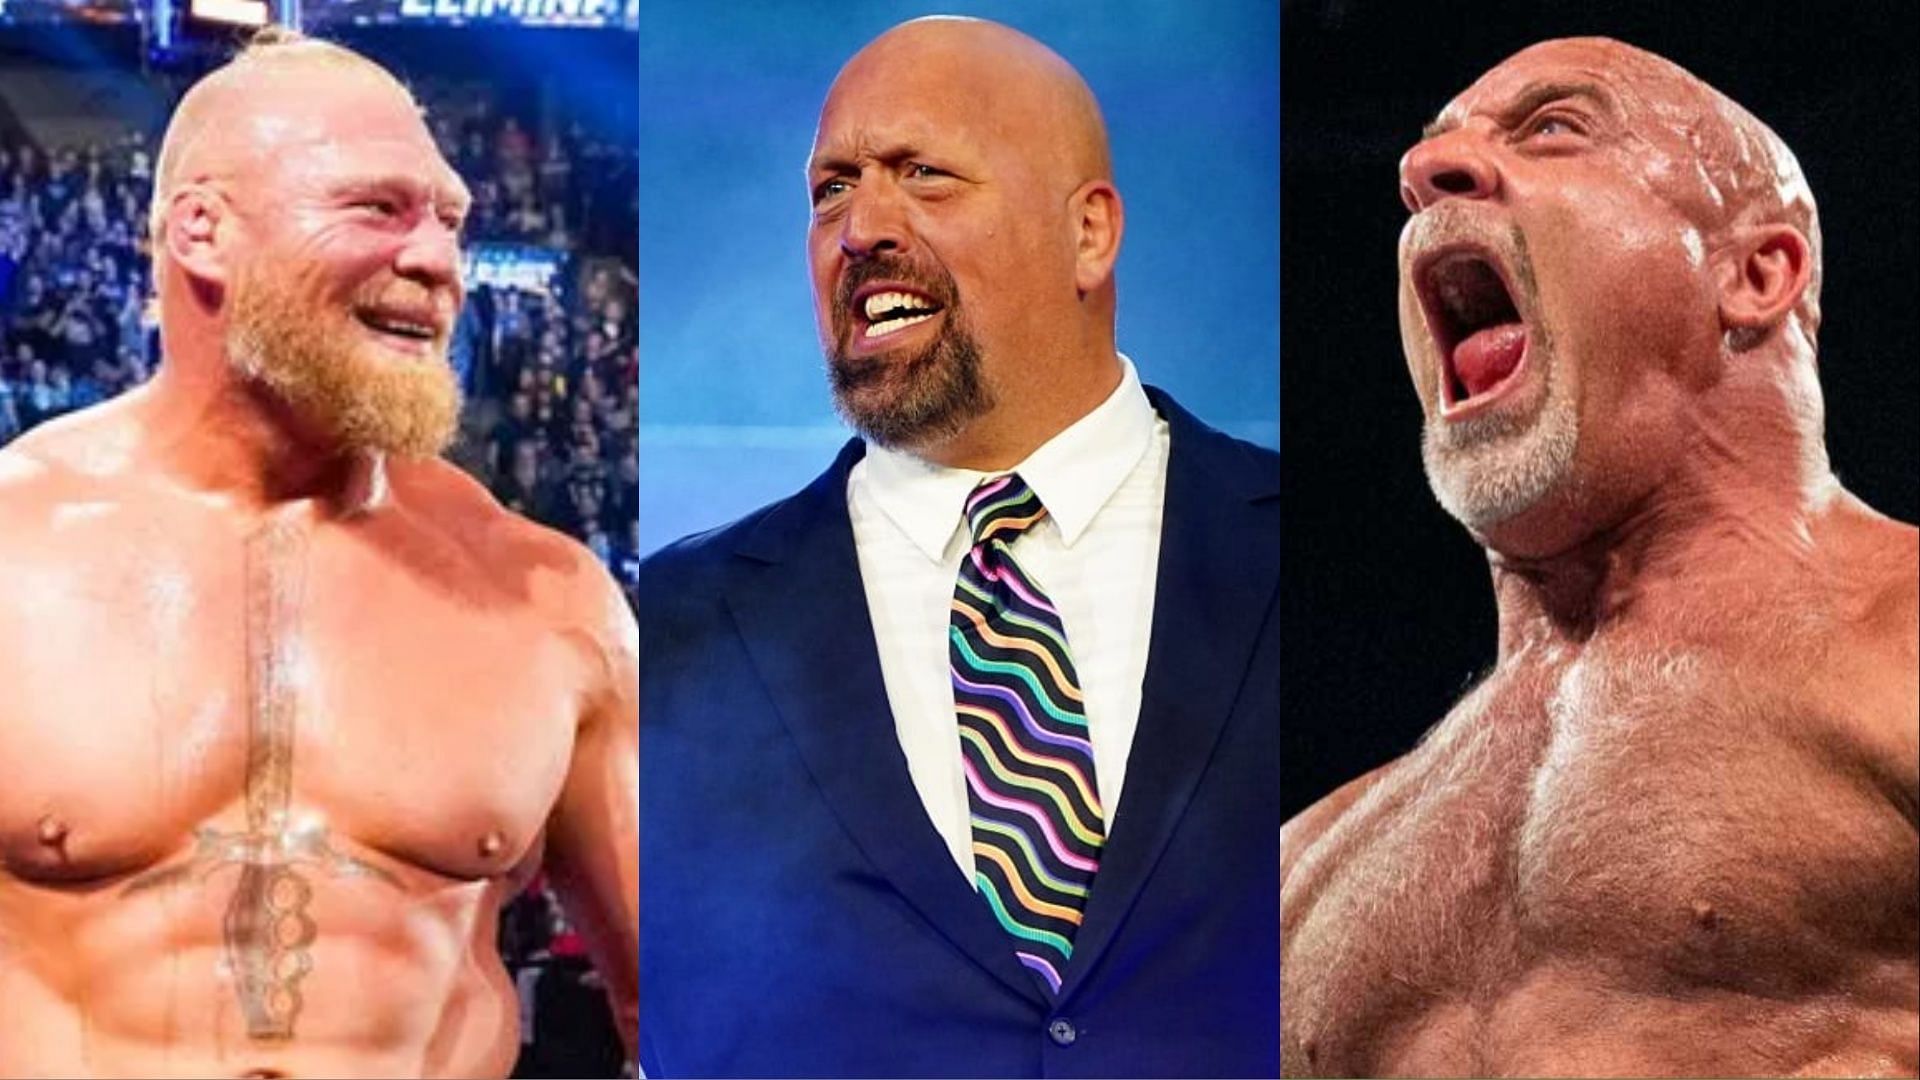 Paul Wight thinks an AEW star is as intense as Brock Lesnar and Goldberg